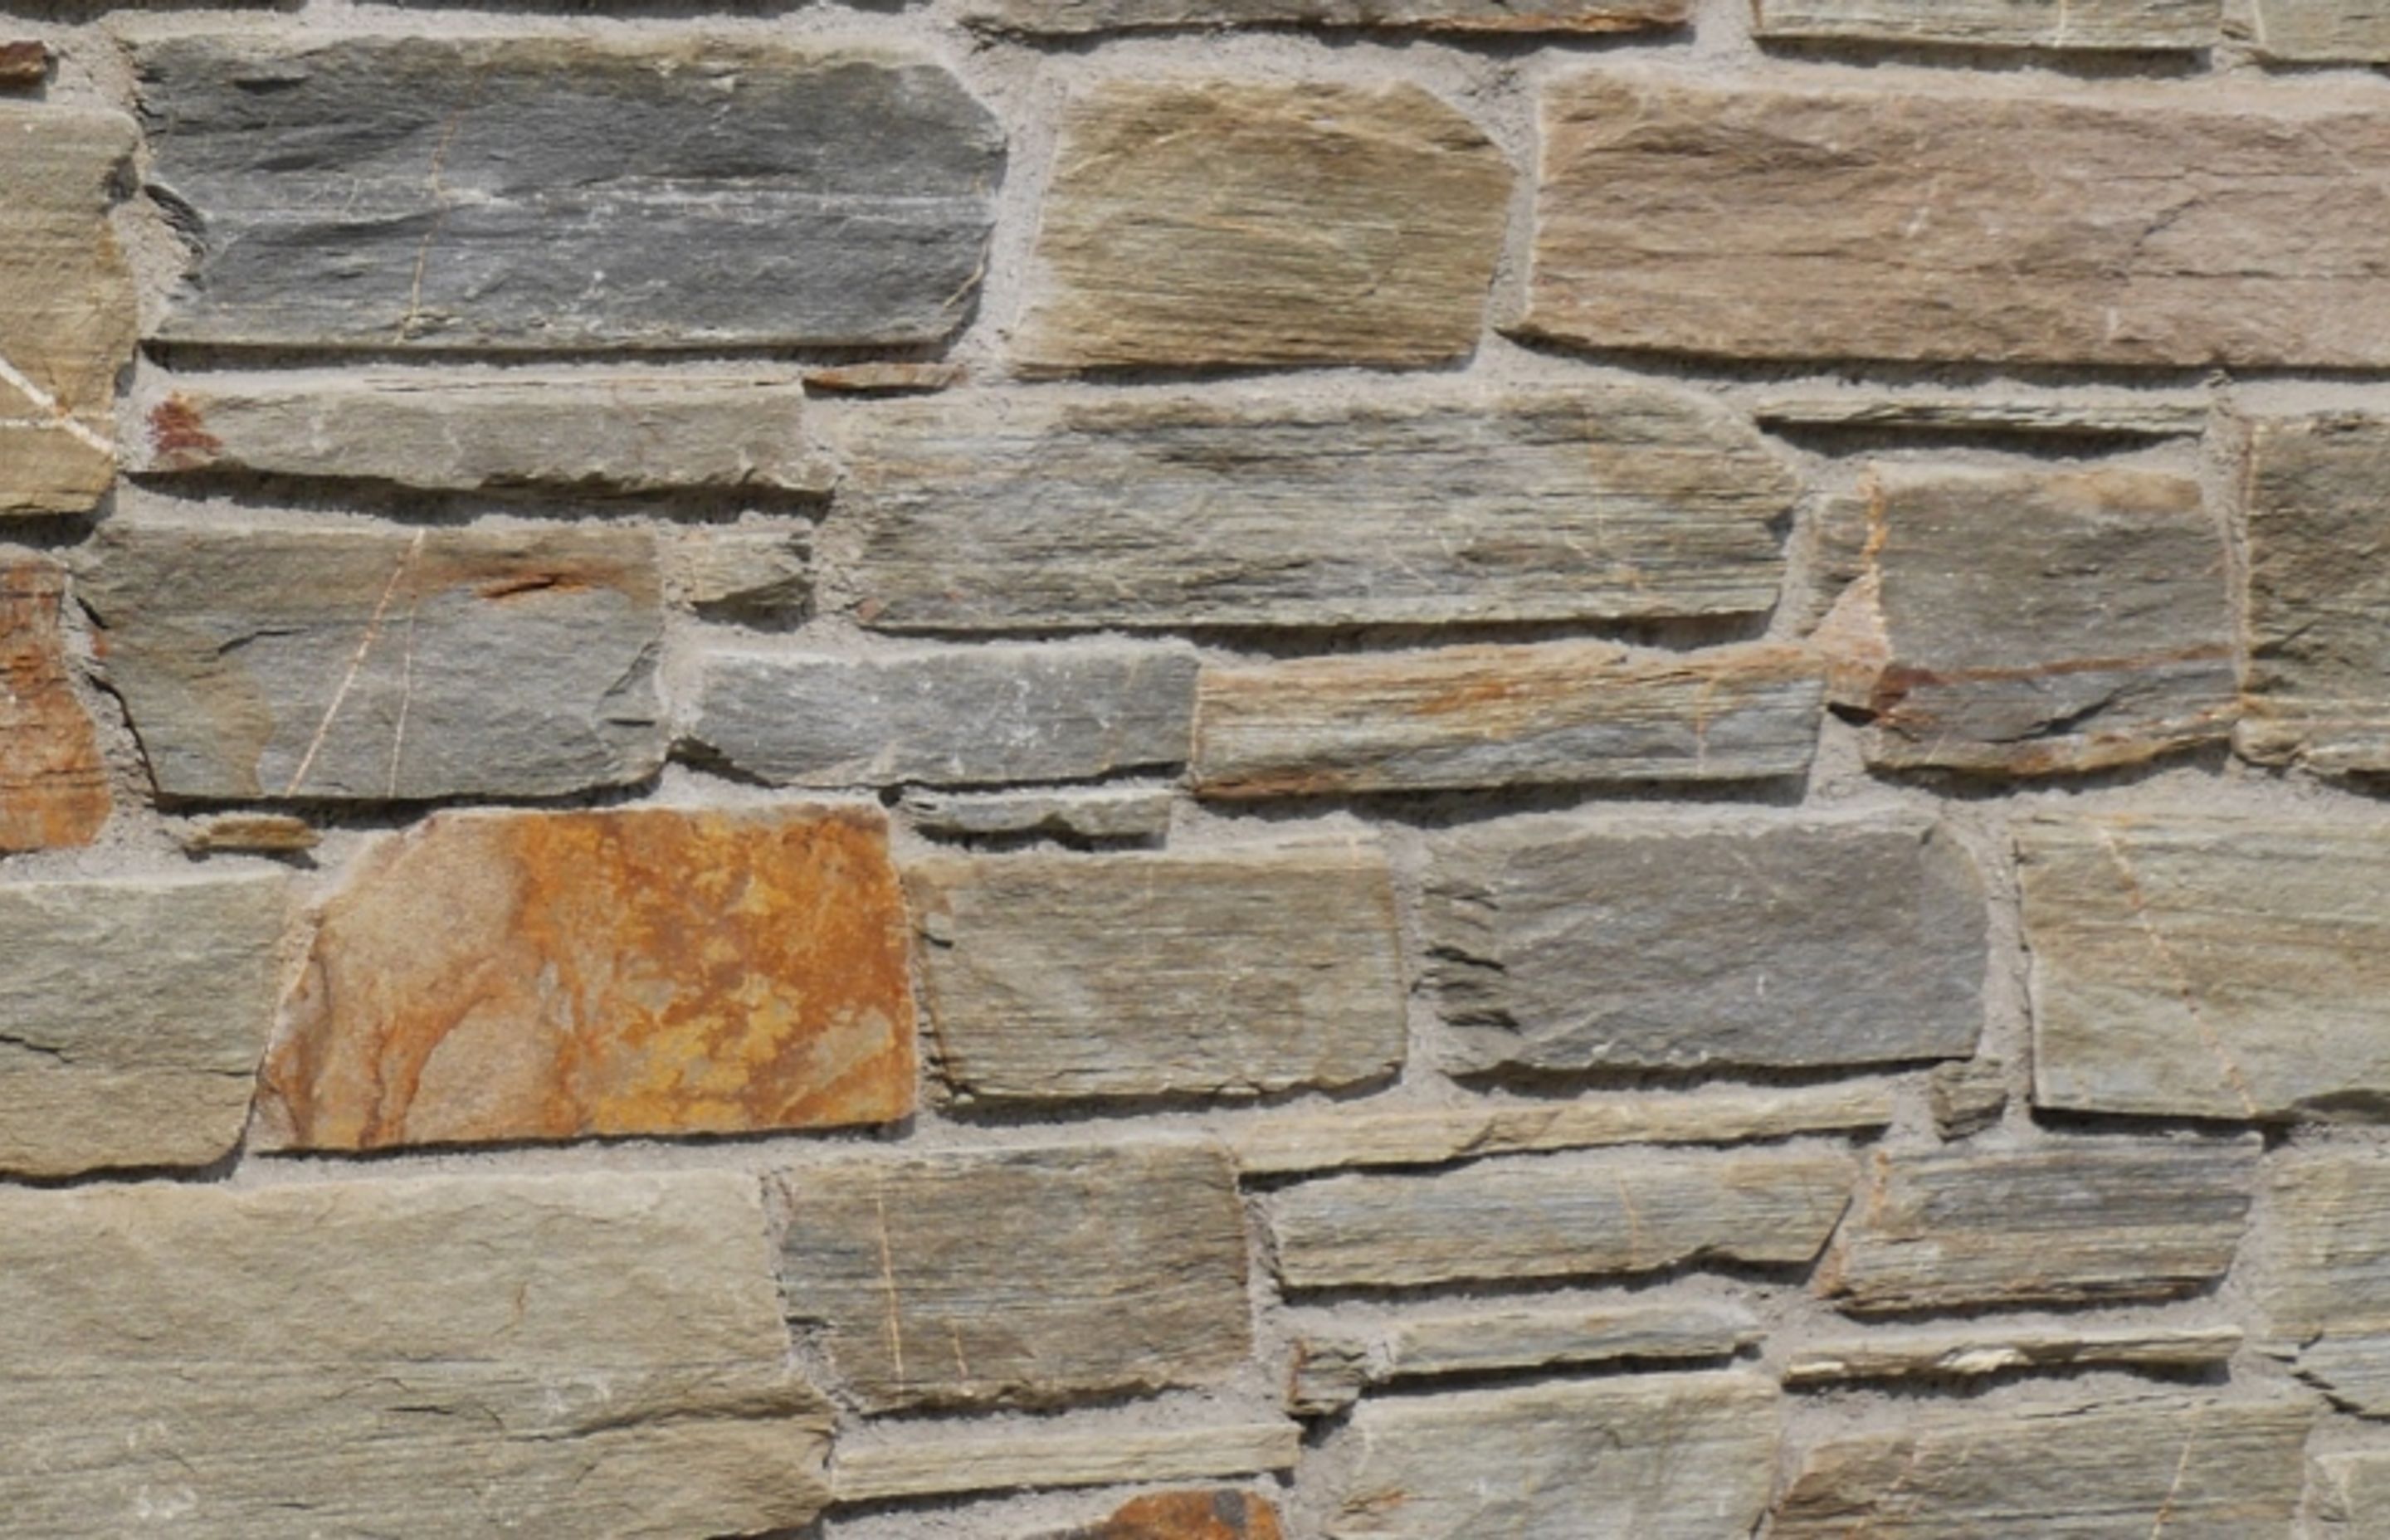 10mm Joint: Traditional finish for stacked stone walls with a regular 10mm gap grout gap between every stone both horizontally and vertically. Grout can be left flush with the stone or raked (recessed) to create a gap giving a more natural appearance.